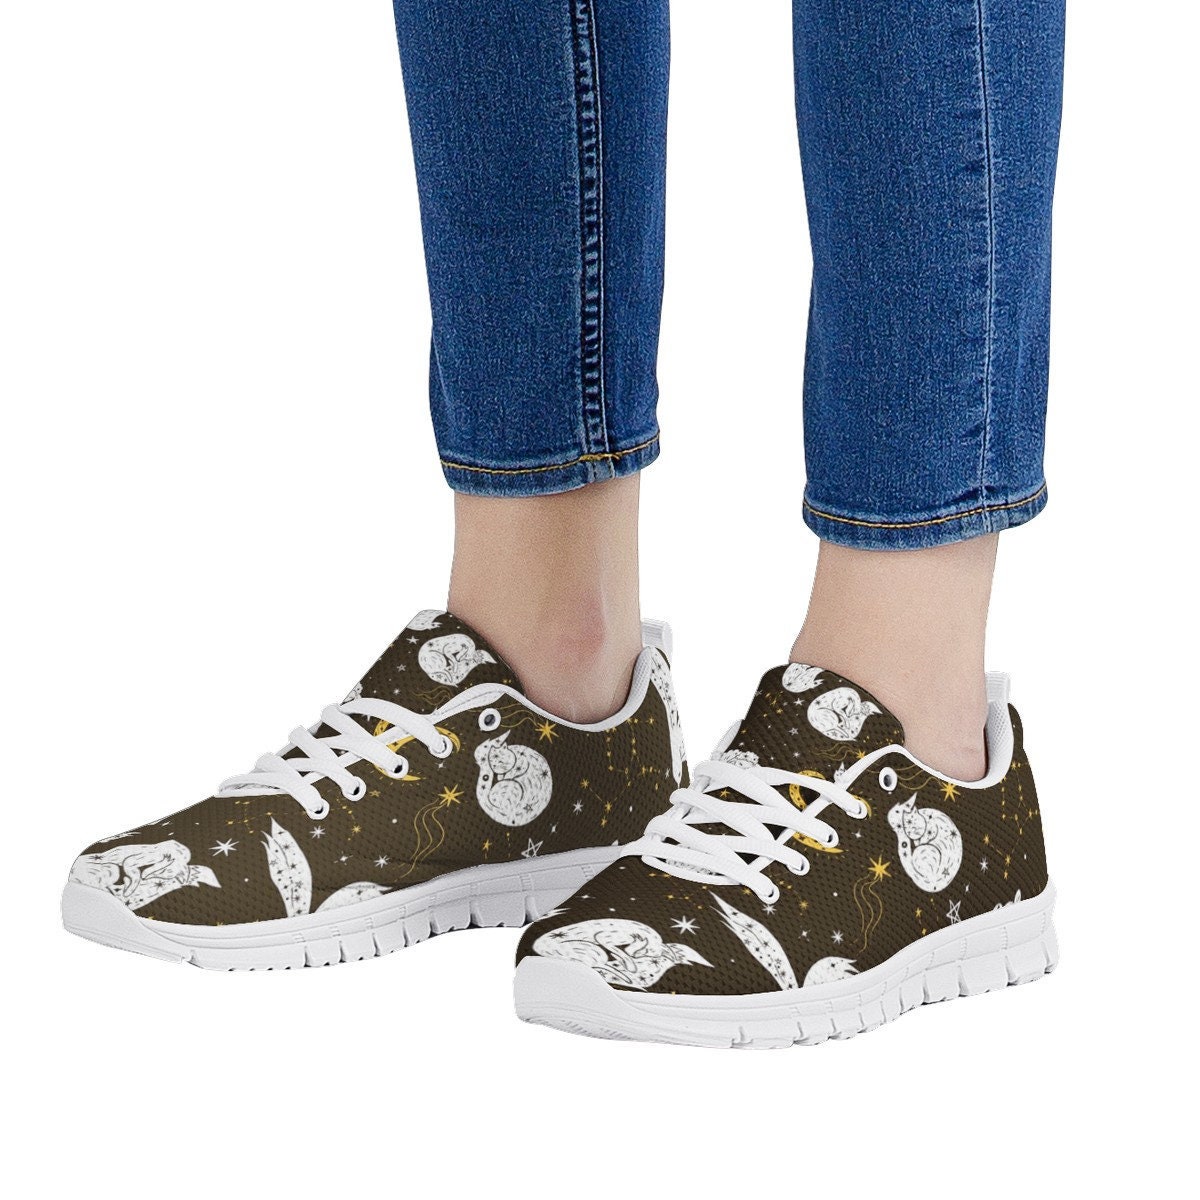 Constellation shoes, Andromeda Shoes, Women Owl Sneakers, Cute sneakers, Owl sneakers, women, men or kids sneakers